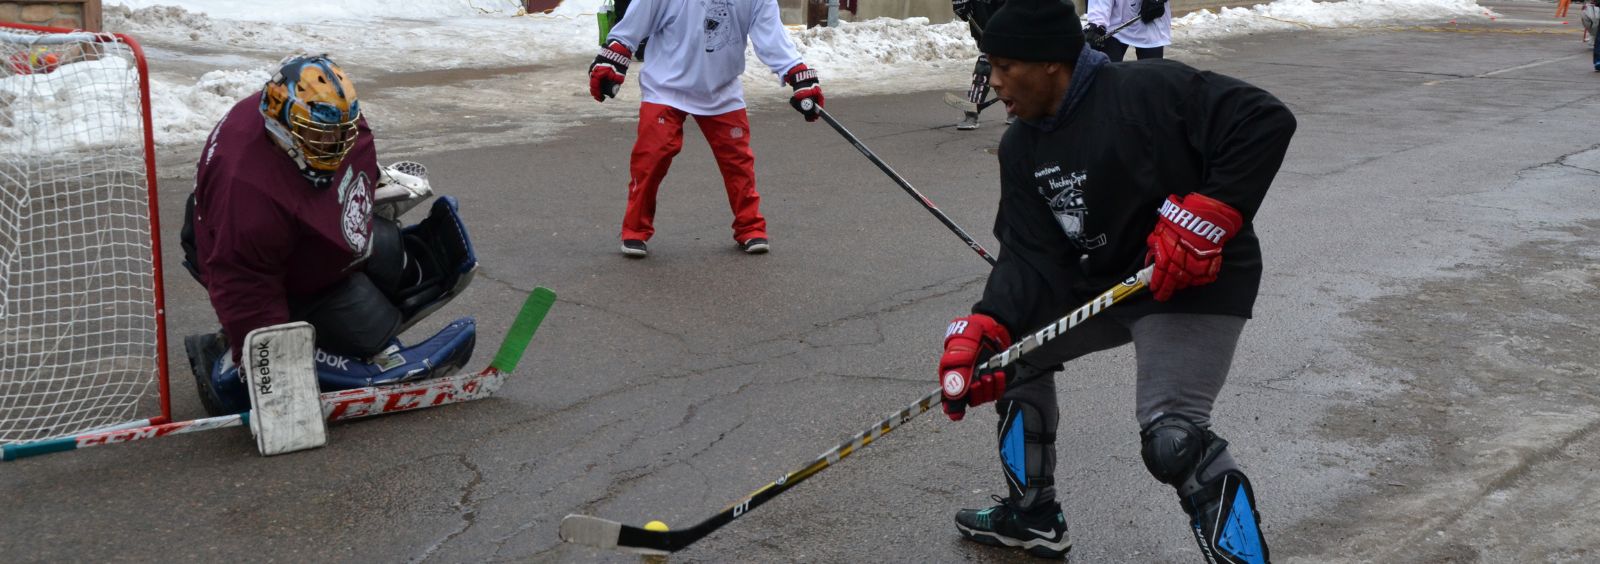 Youth playing road hockey in winter.